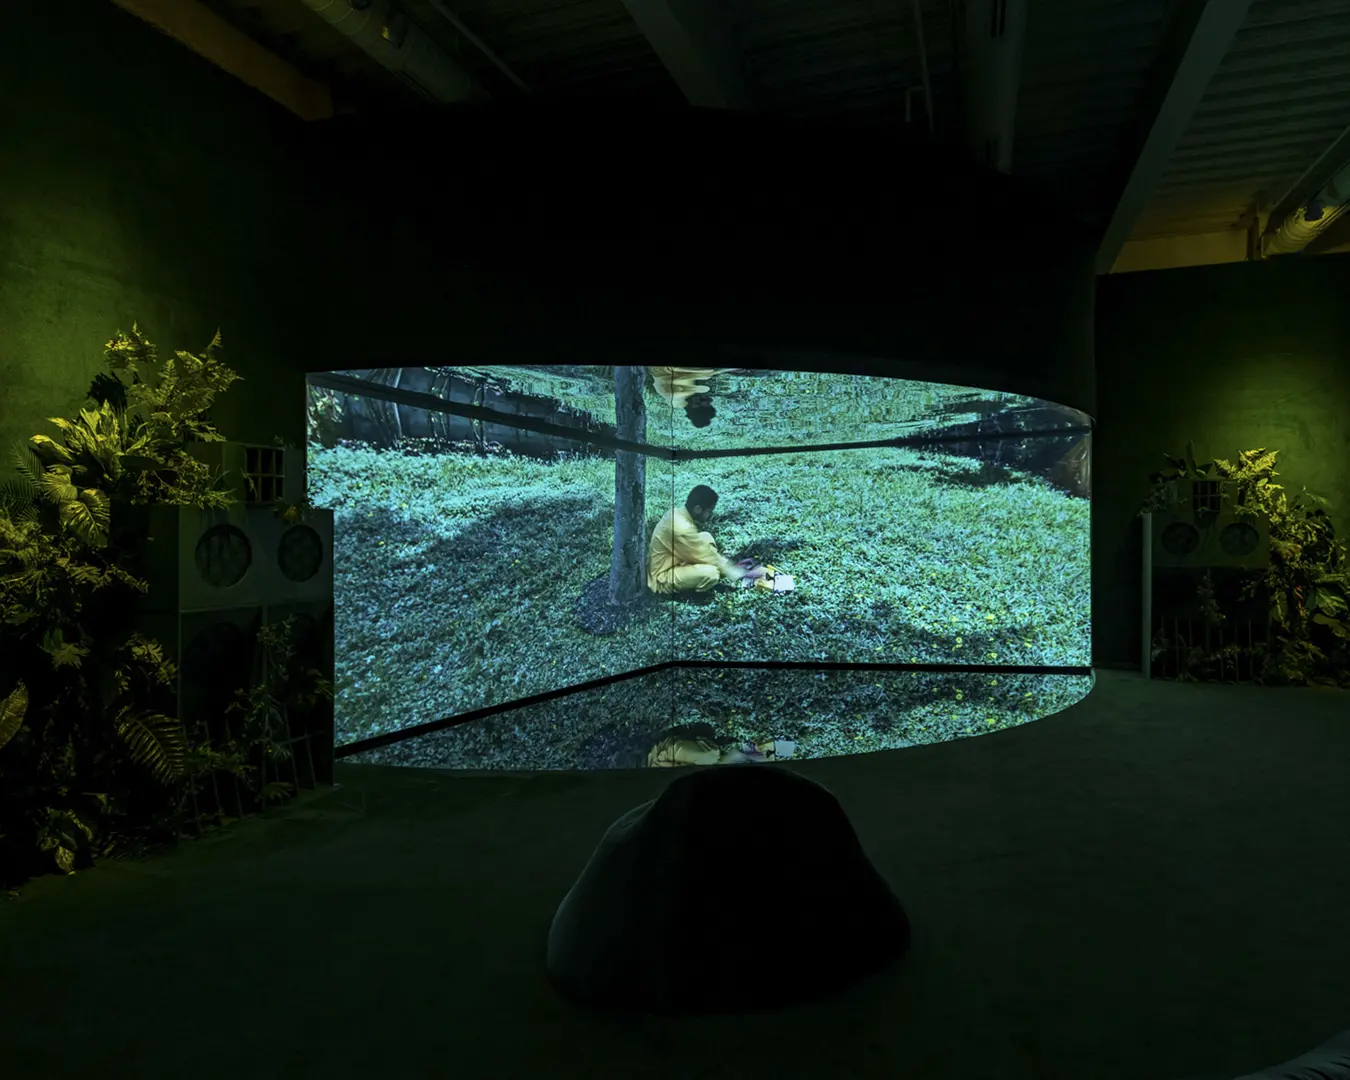 Terence Nance, Swimming In Your Skin Again, 2015; video, two-channel projection, water, mirror, plants, sound system; installation view at the Institute of Contemporary Art, Philadelphia, PA. Photo by Constance Mensh. &nbsp;&nbsp;